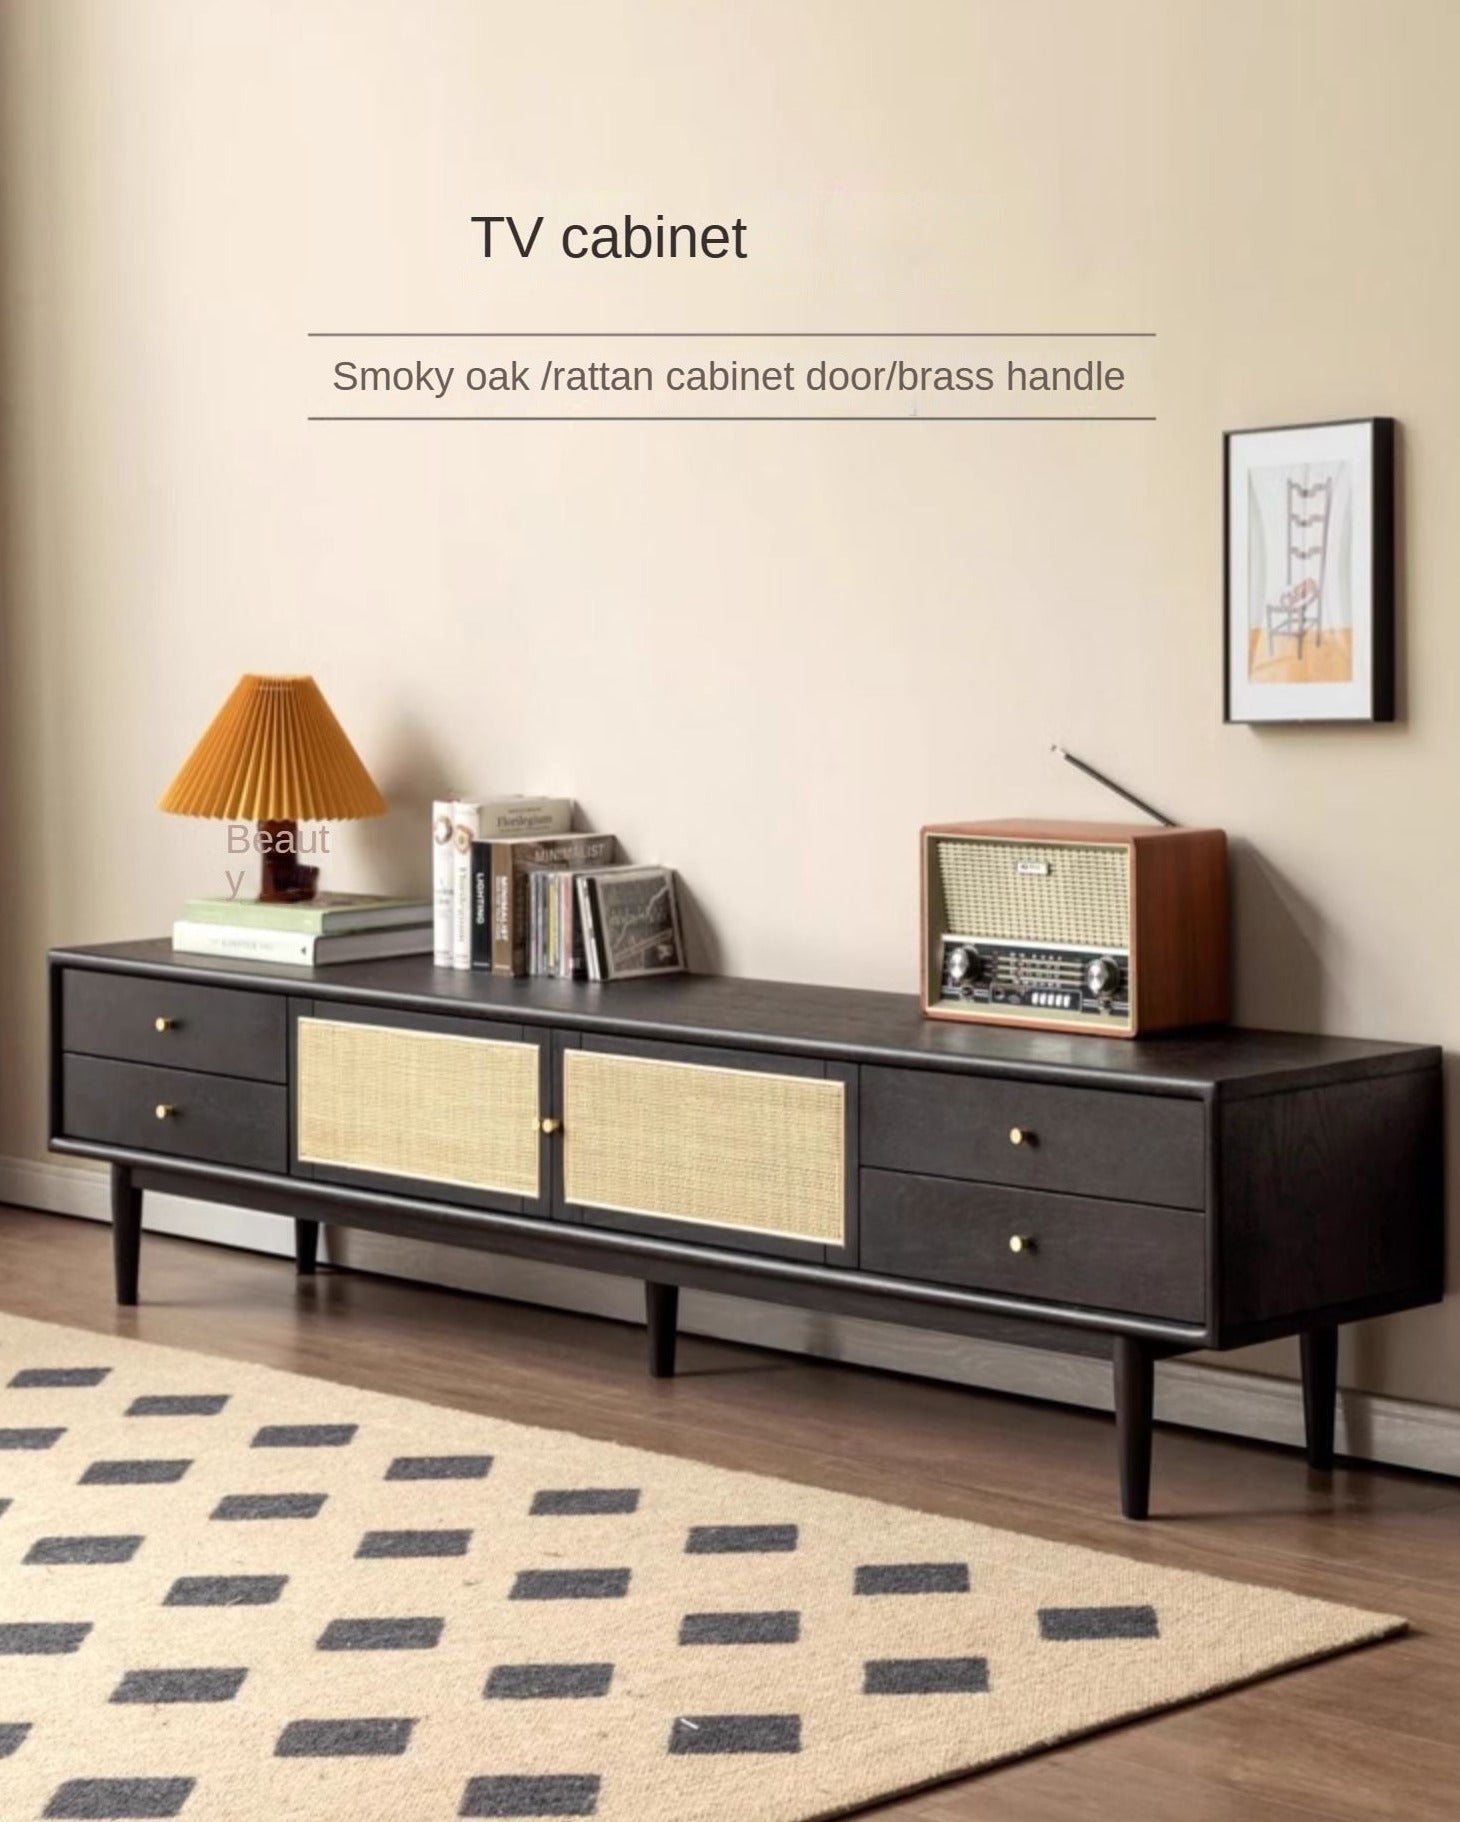 Oak solid wood rattan Four drawer TV cabinet Smoked